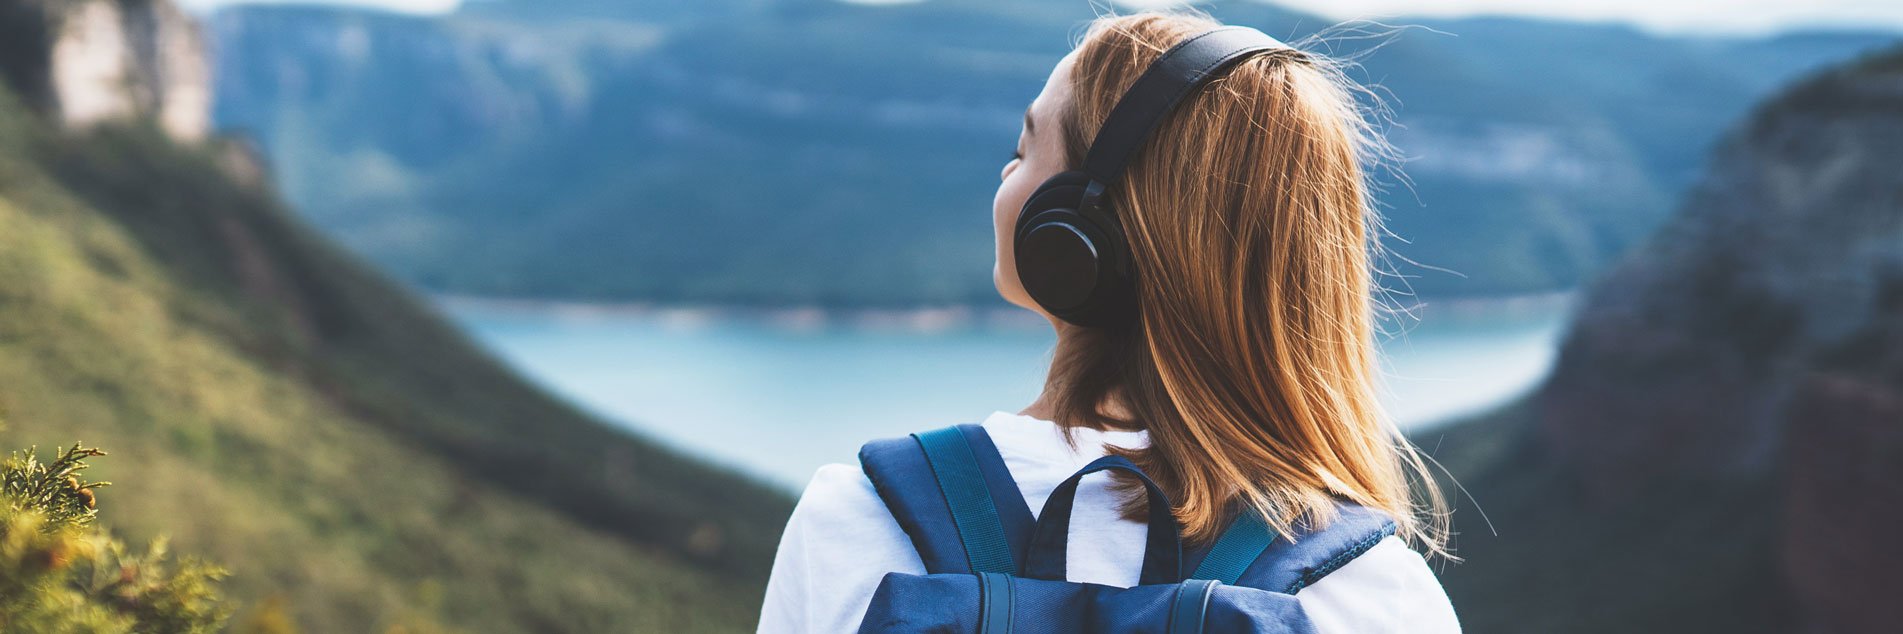 image: woman with backpack meditating listen to music with headphones